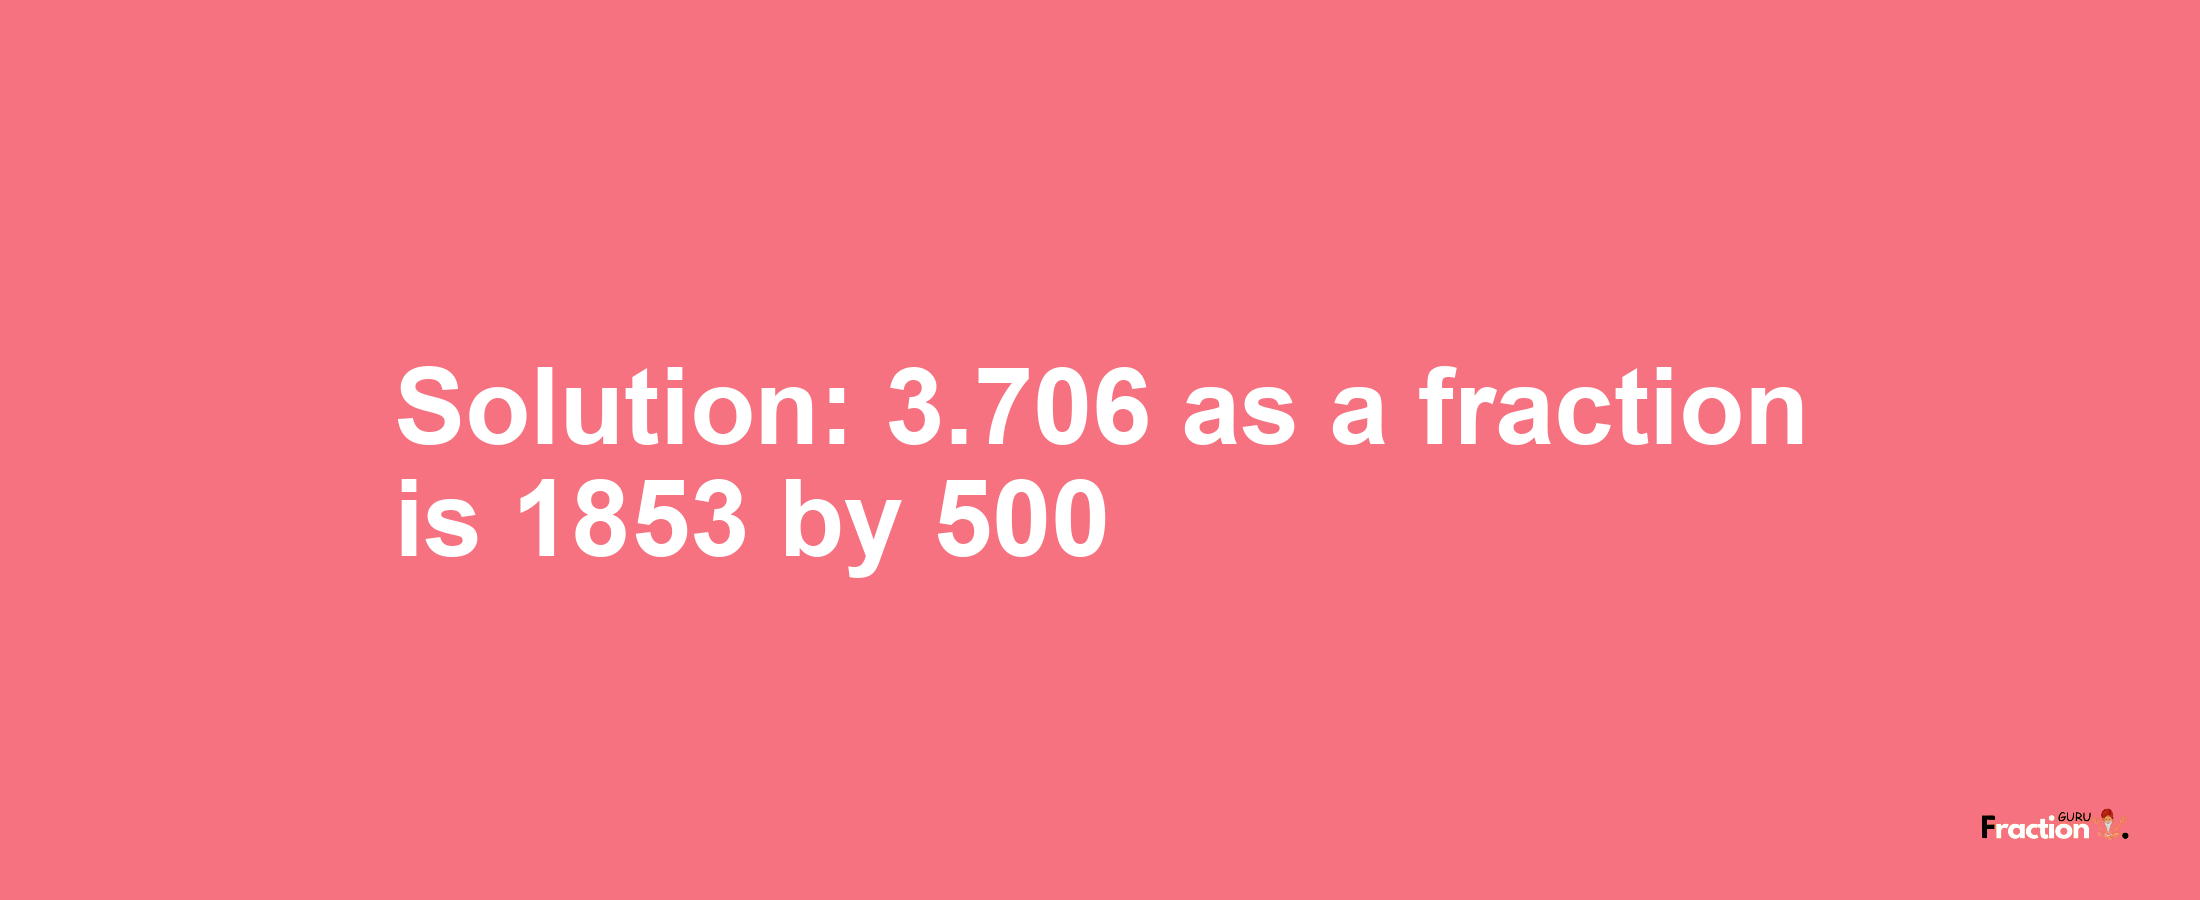 Solution:3.706 as a fraction is 1853/500